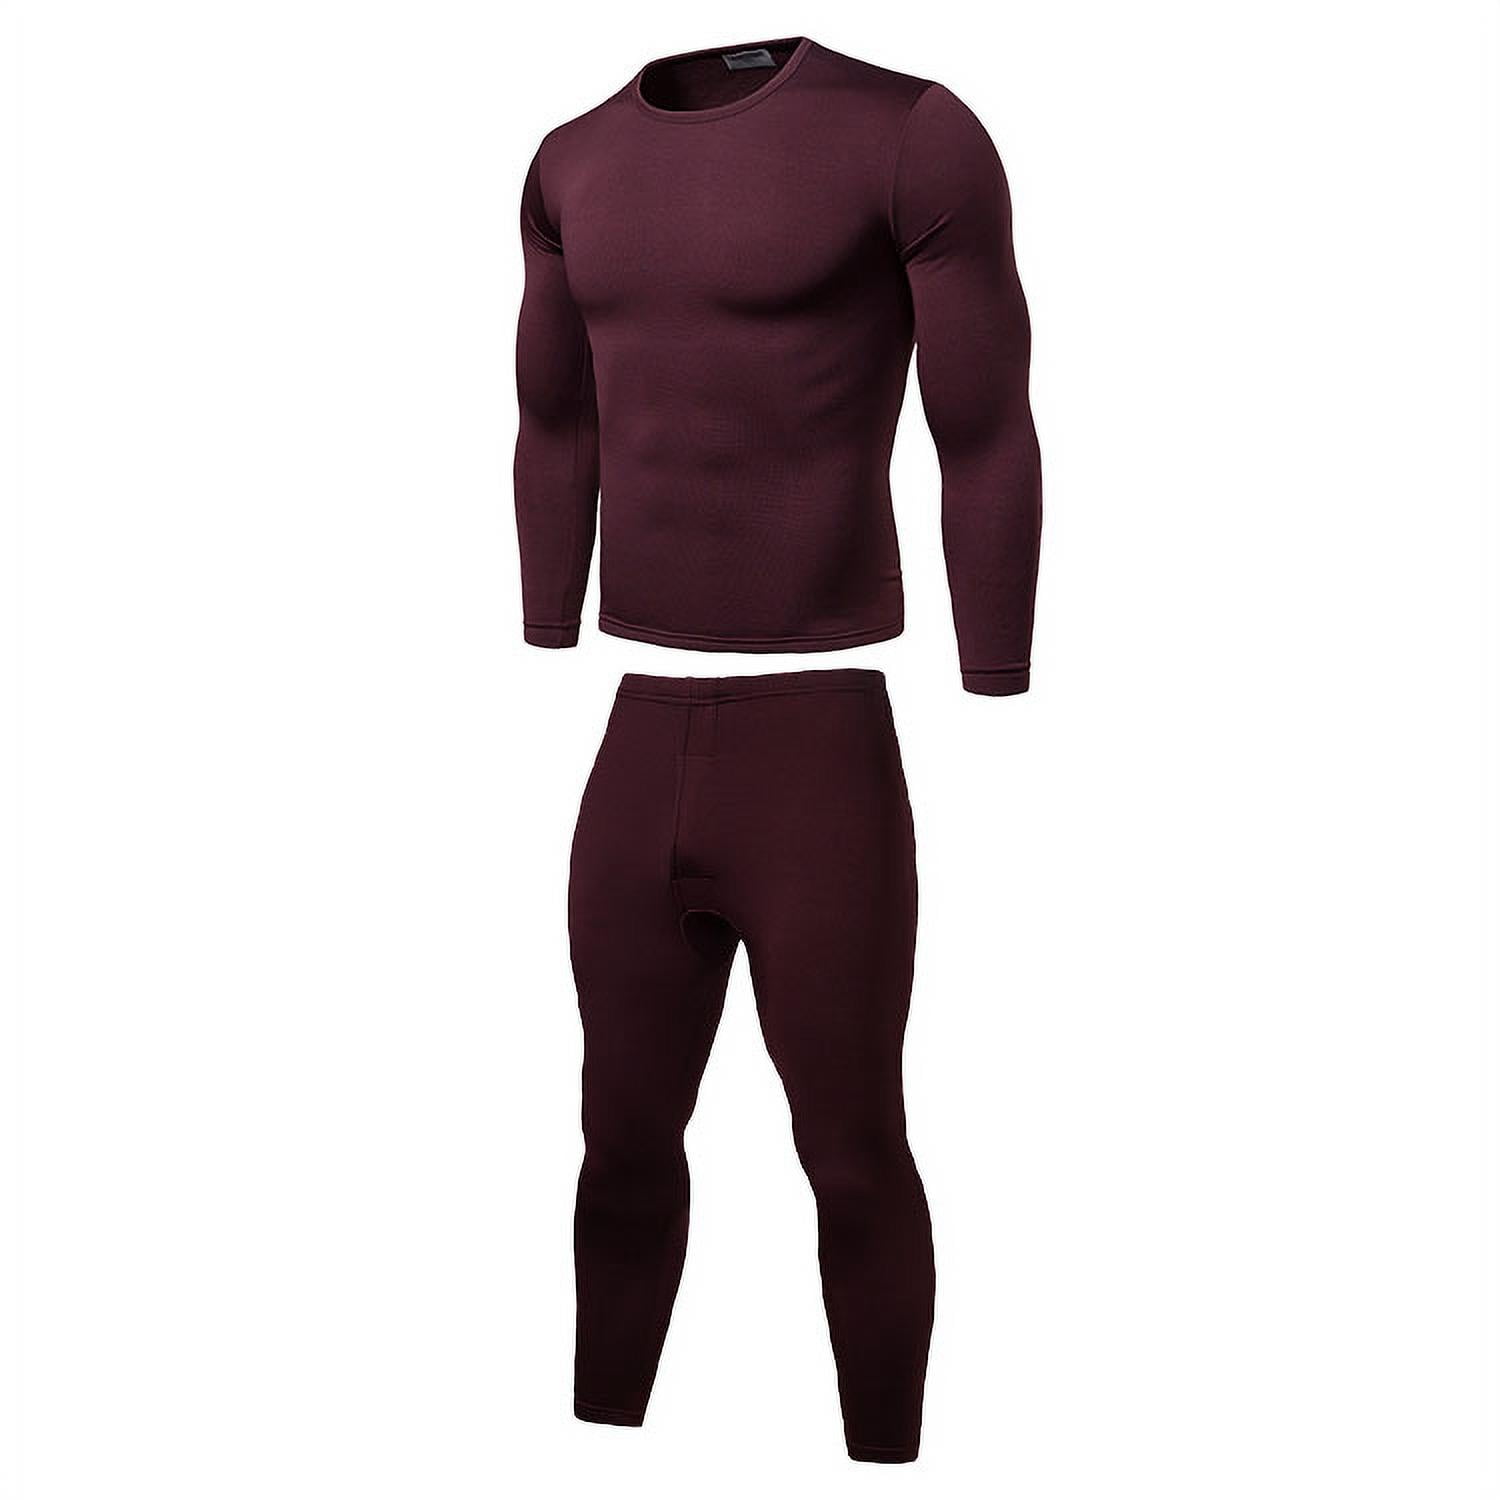 Men's Long Underwear for Skiing– Thermajohn